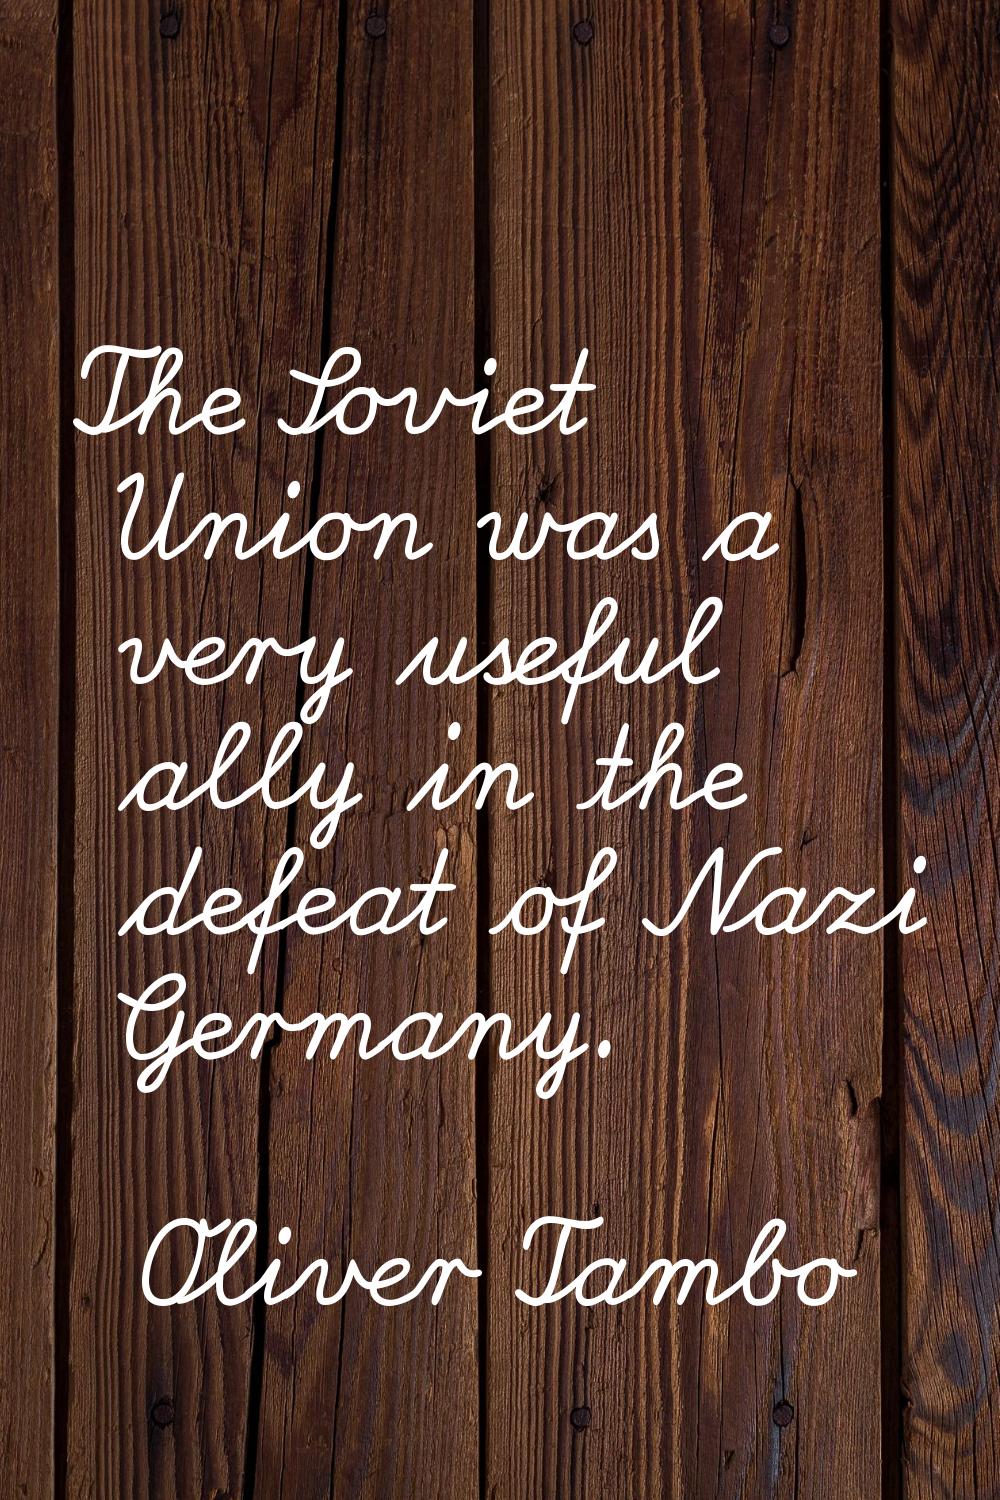 The Soviet Union was a very useful ally in the defeat of Nazi Germany.